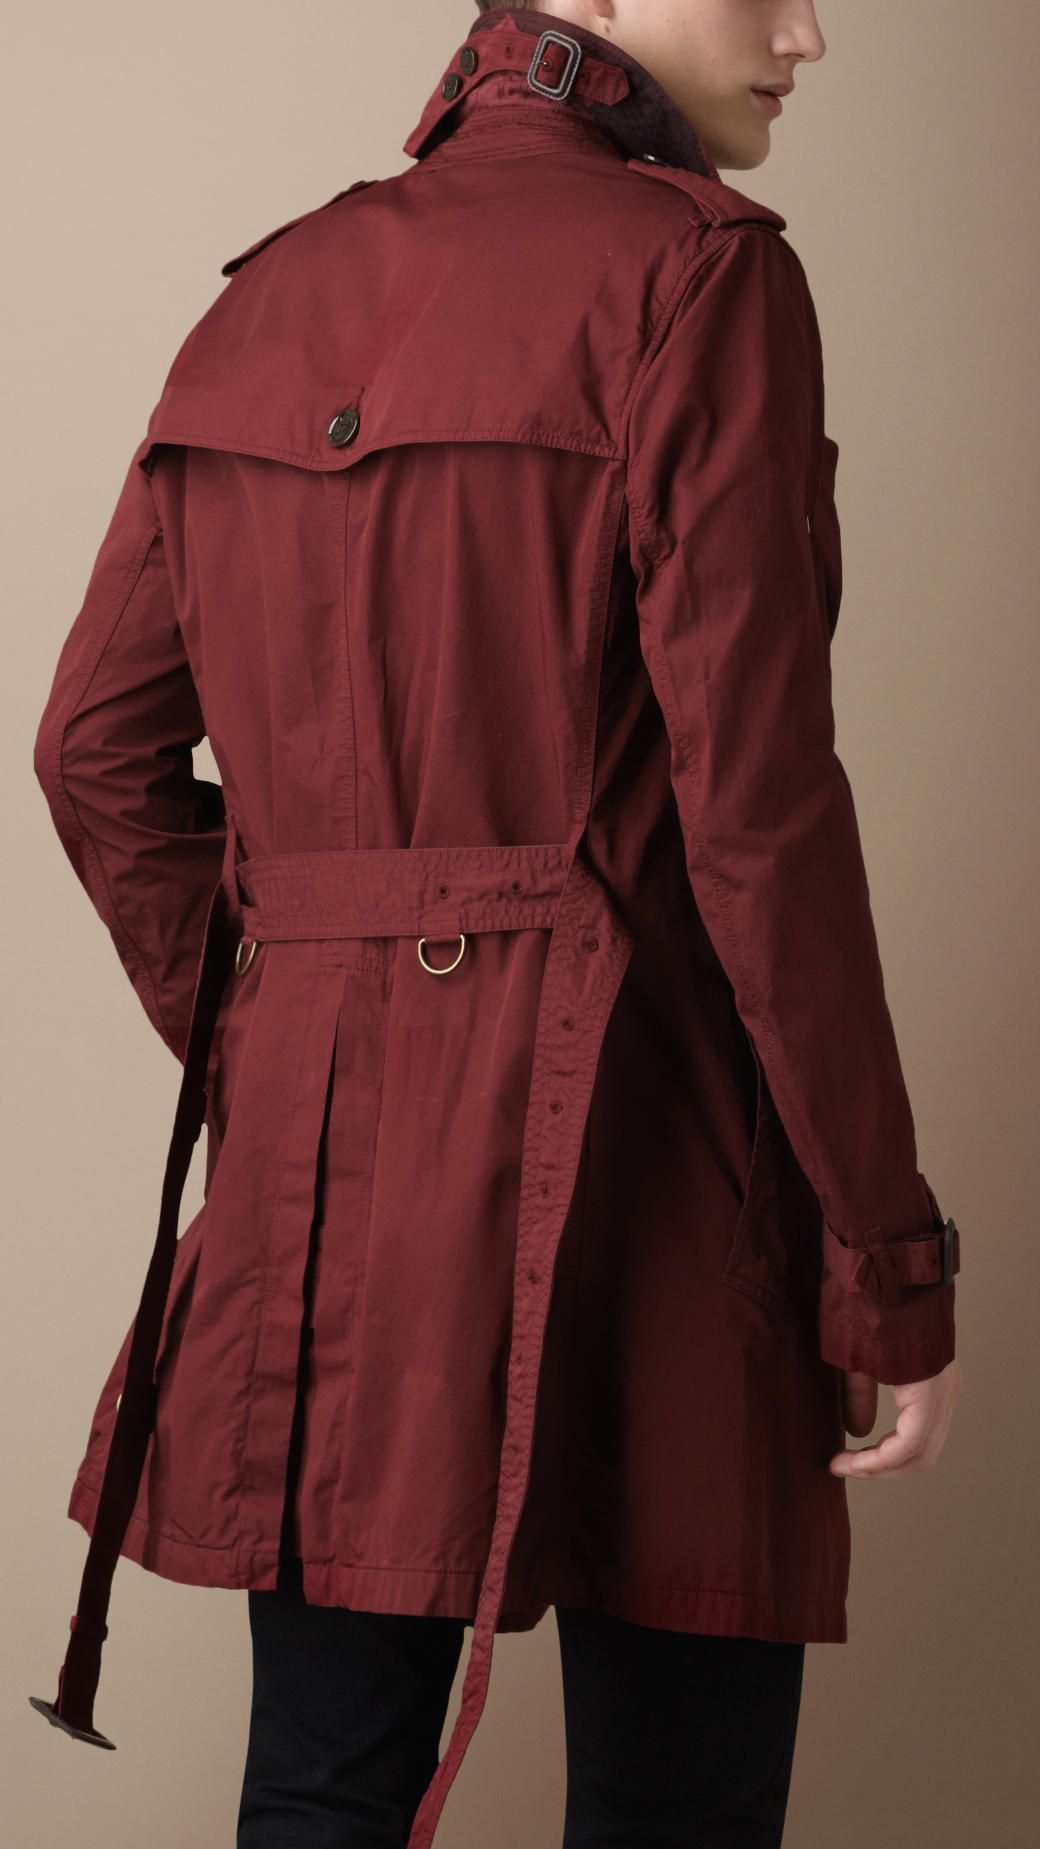 Burberry Brit Midlength Twill Trench Coat in Red Claret (Red) for Men